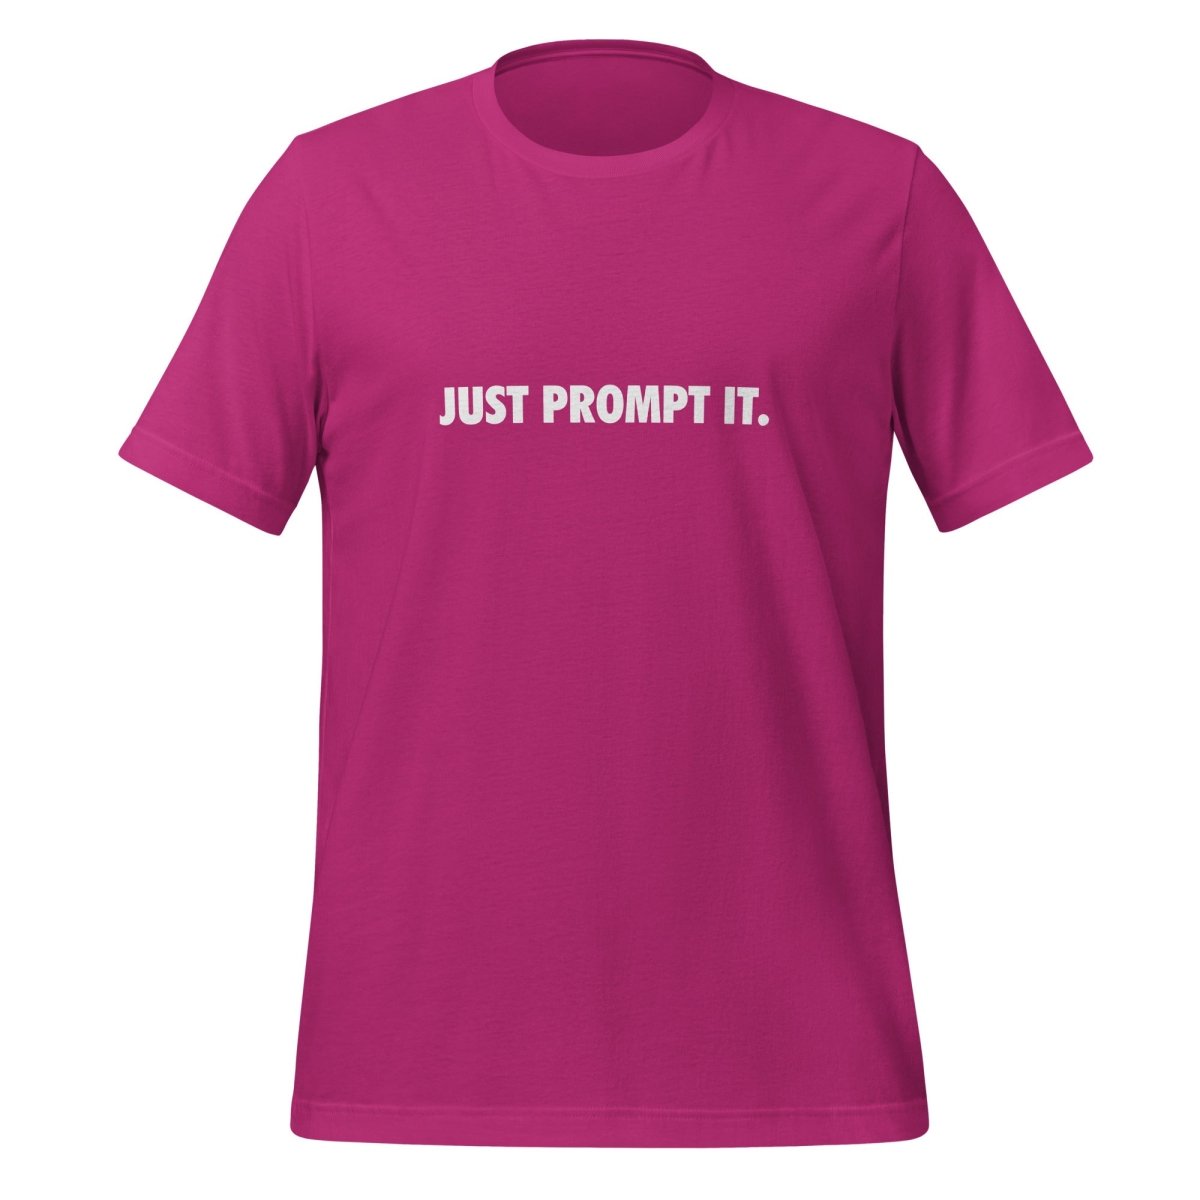 JUST PROMPT IT. T - Shirt (unisex) - Berry - AI Store